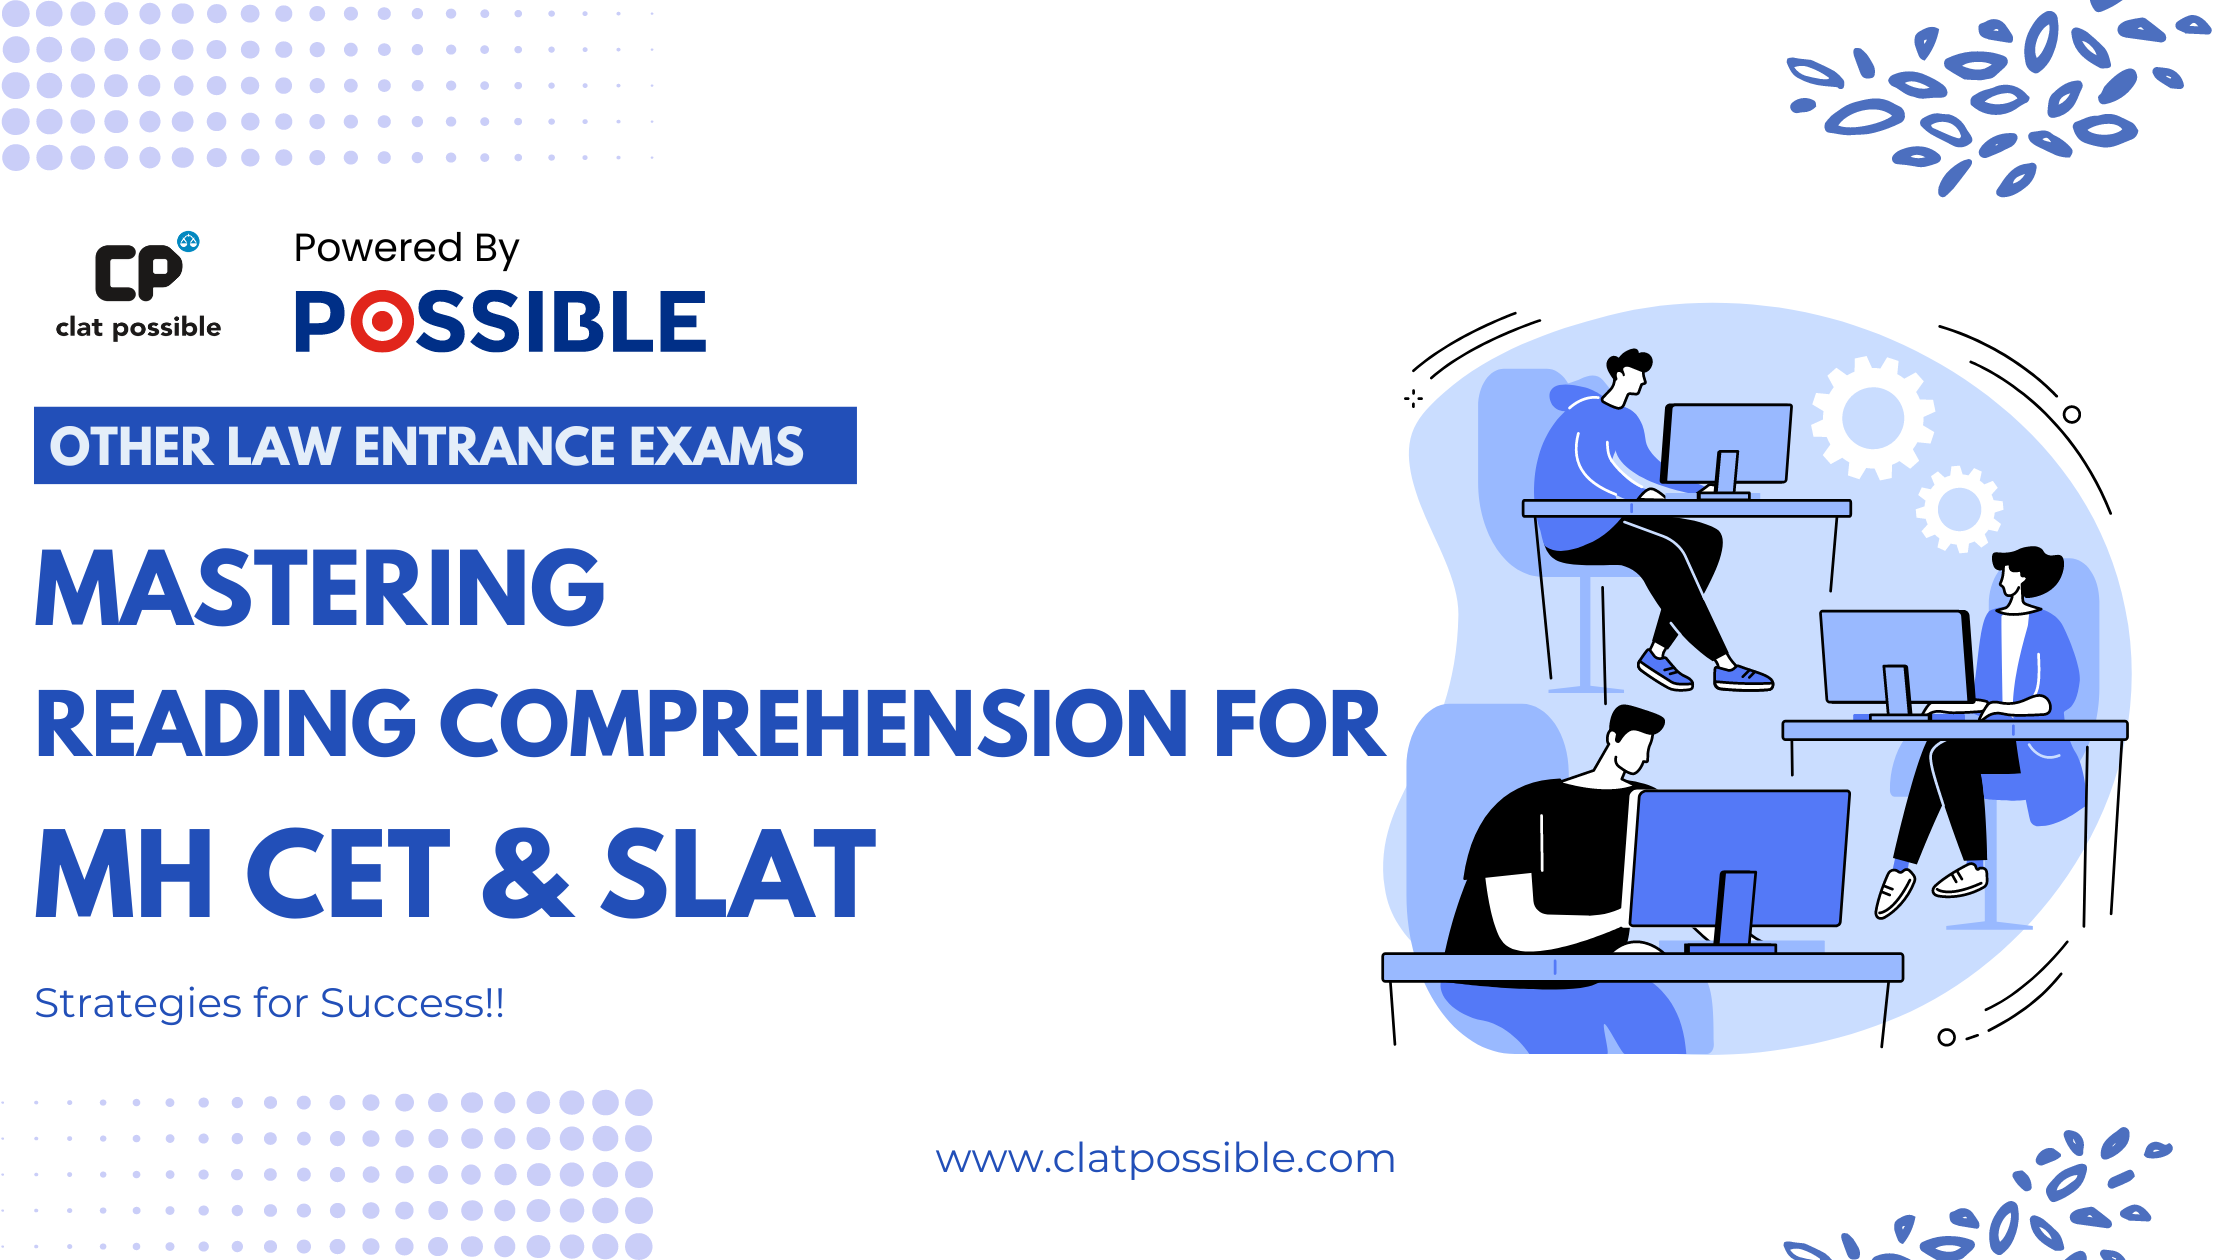 Mastering Reading Comprehension for MHCET and SLAT